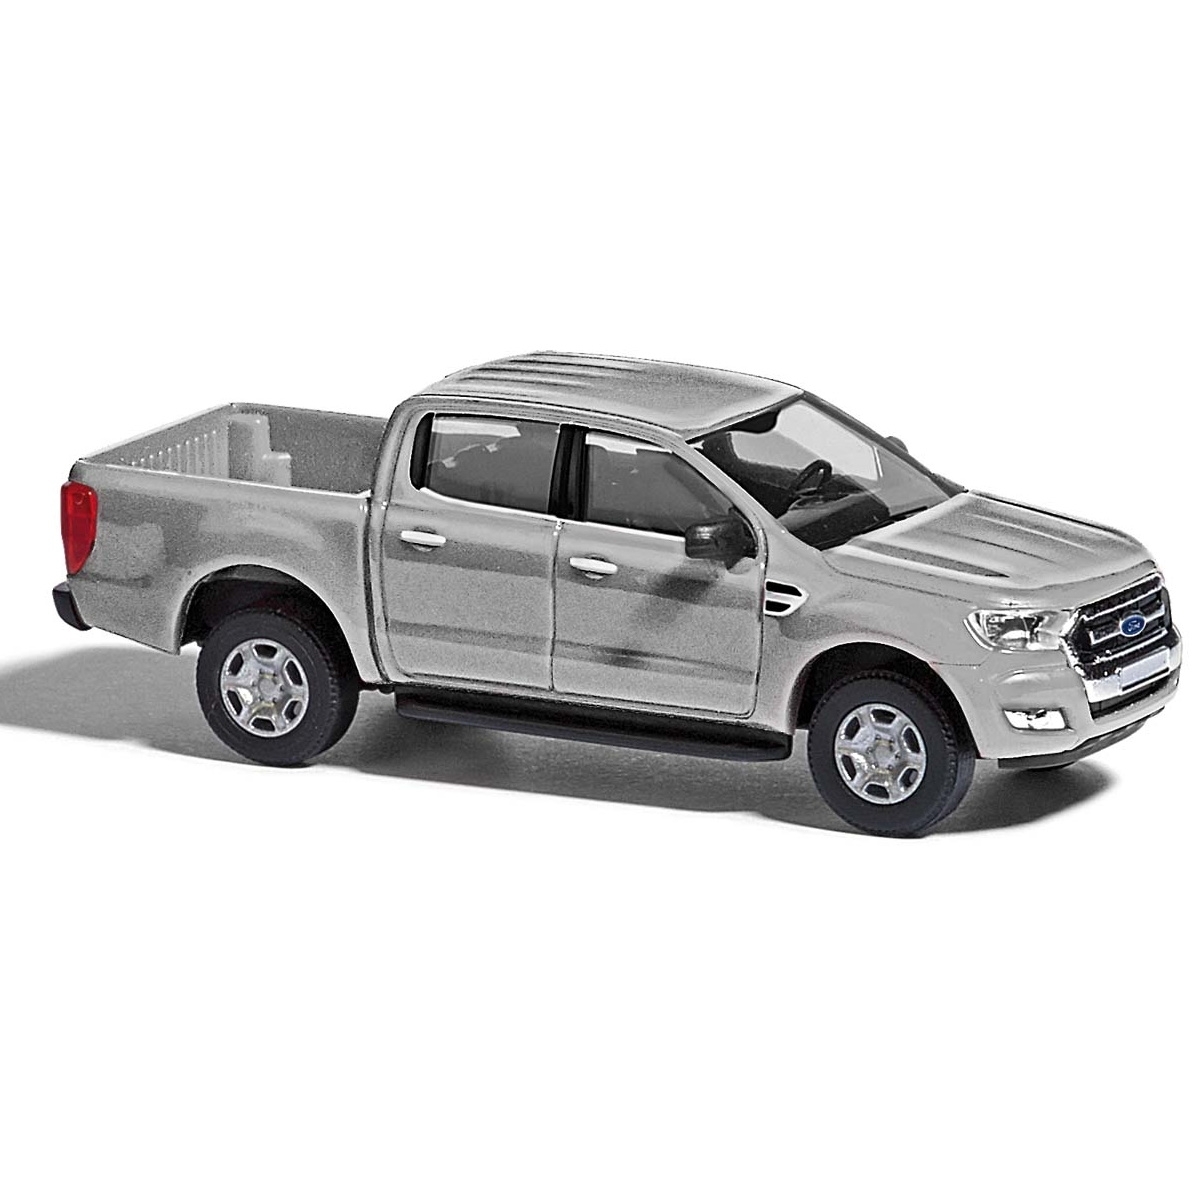 Red HO 1:87 Busch # 52801-2016 Ford Ranger Crew Cab Pickup Truck